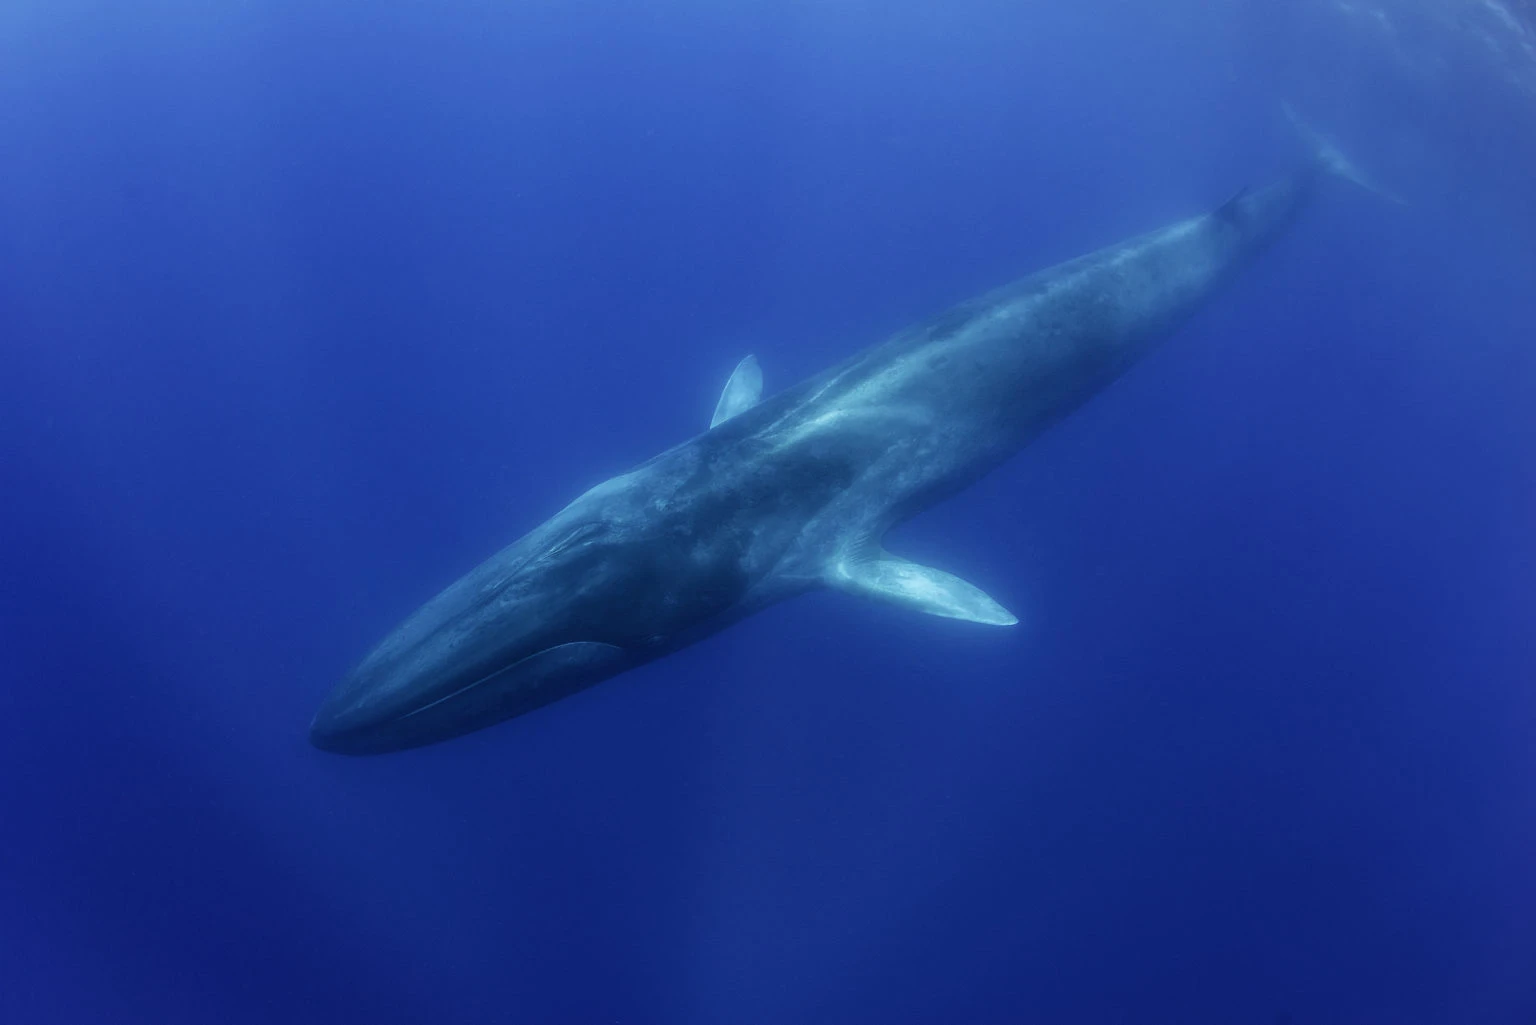 The Largest Animal in the World Is the Blue Whale.